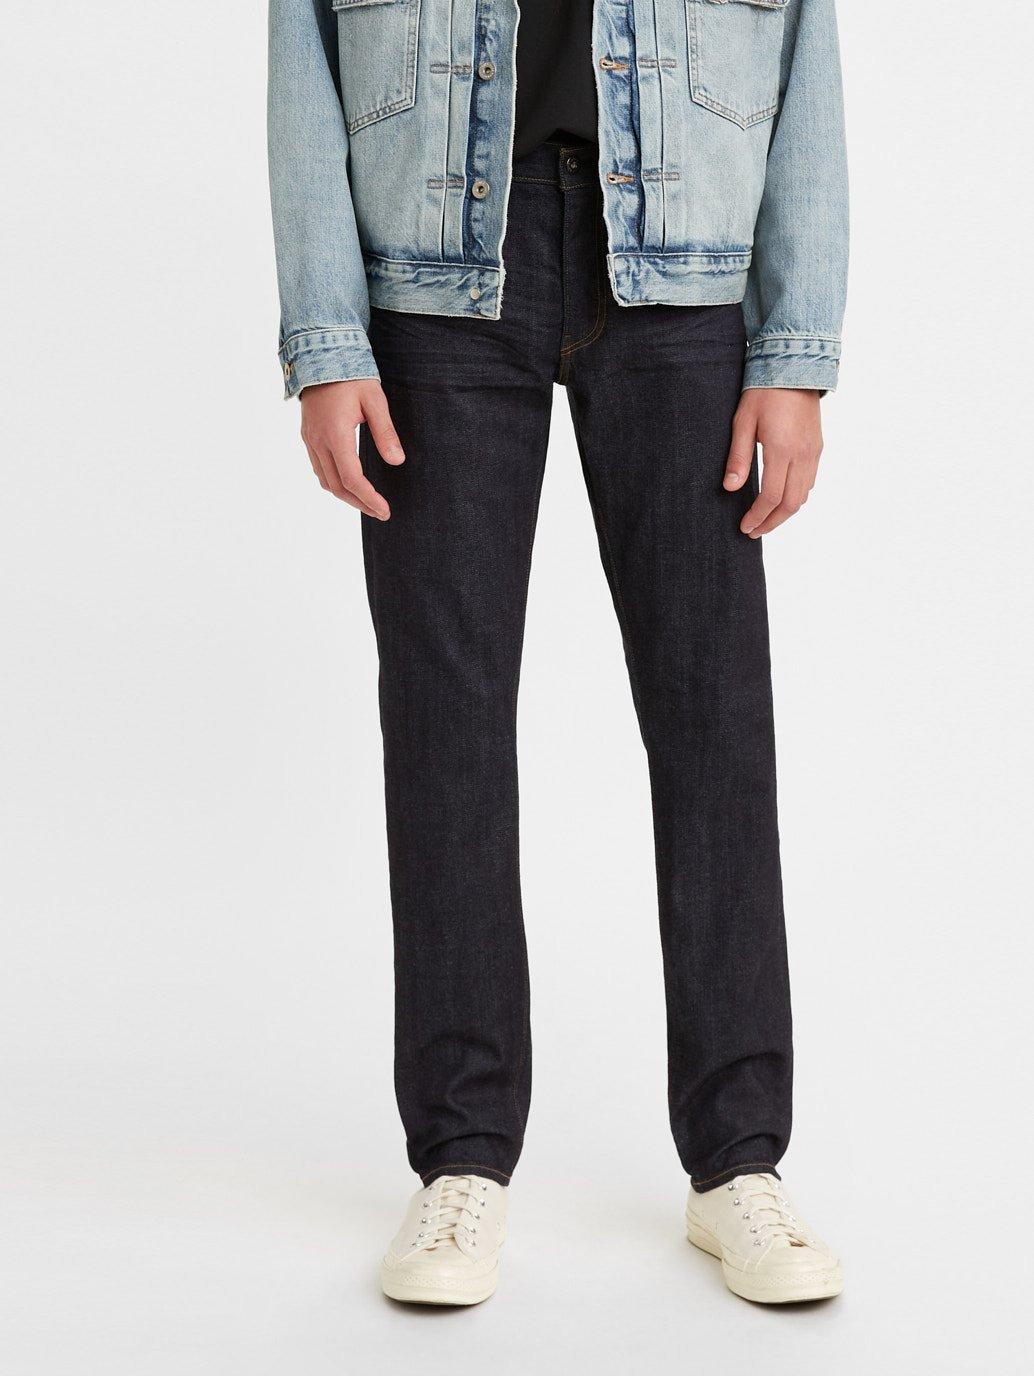 Descubrir 82+ imagen levi’s made and crafted japanese selvedge